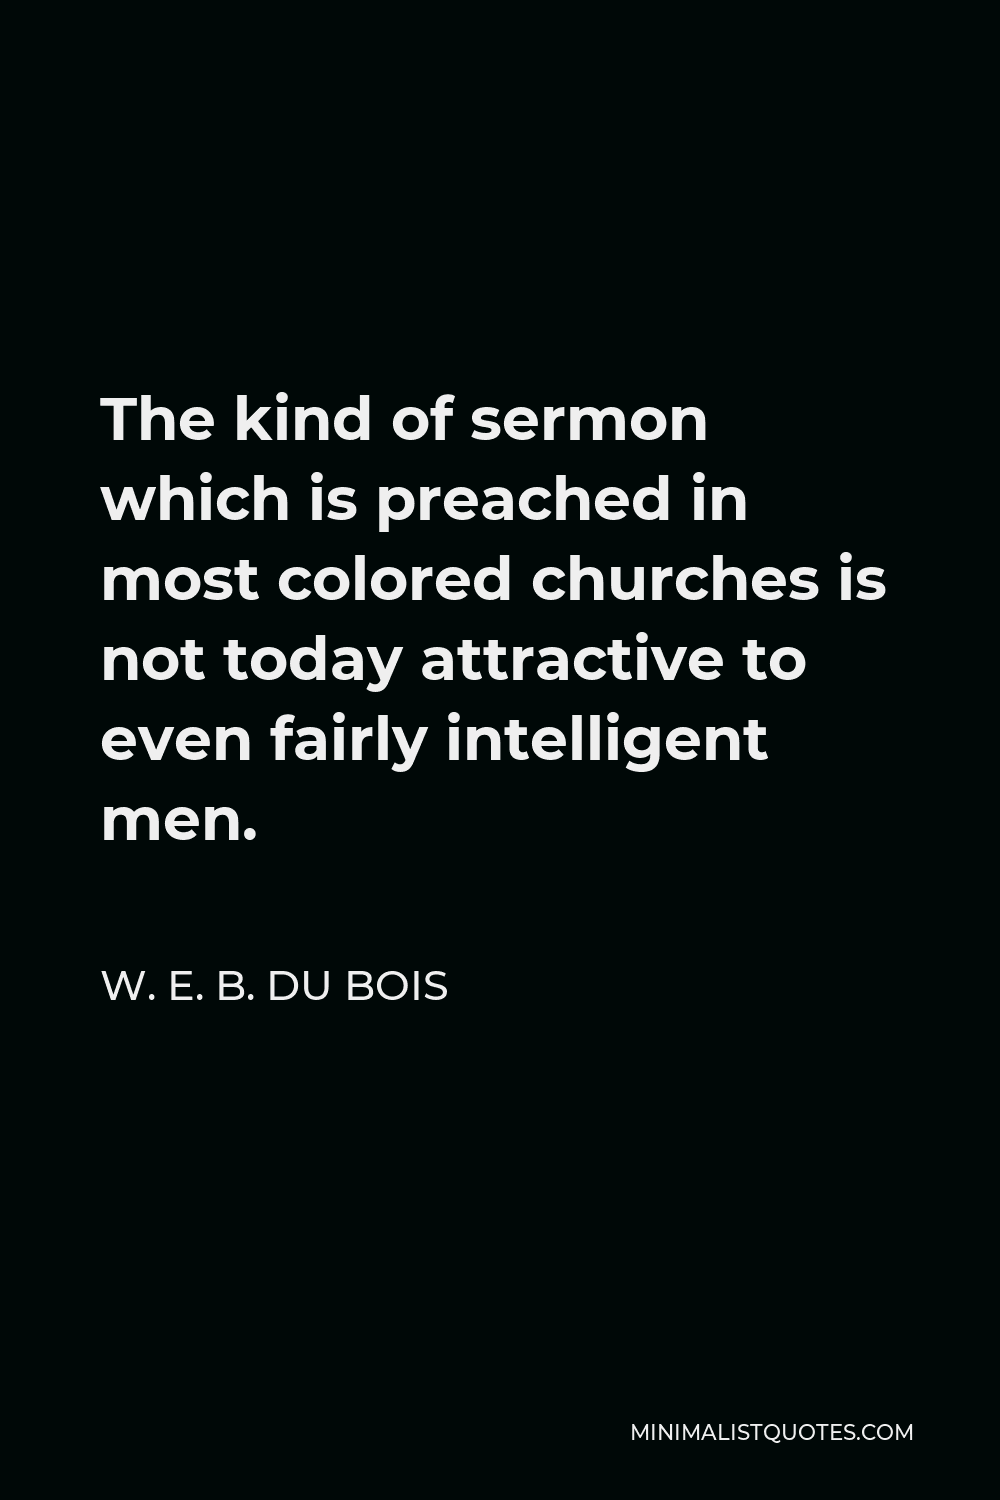 W. E. B. Du Bois Quote - The kind of sermon which is preached in most colored churches is not today attractive to even fairly intelligent men.